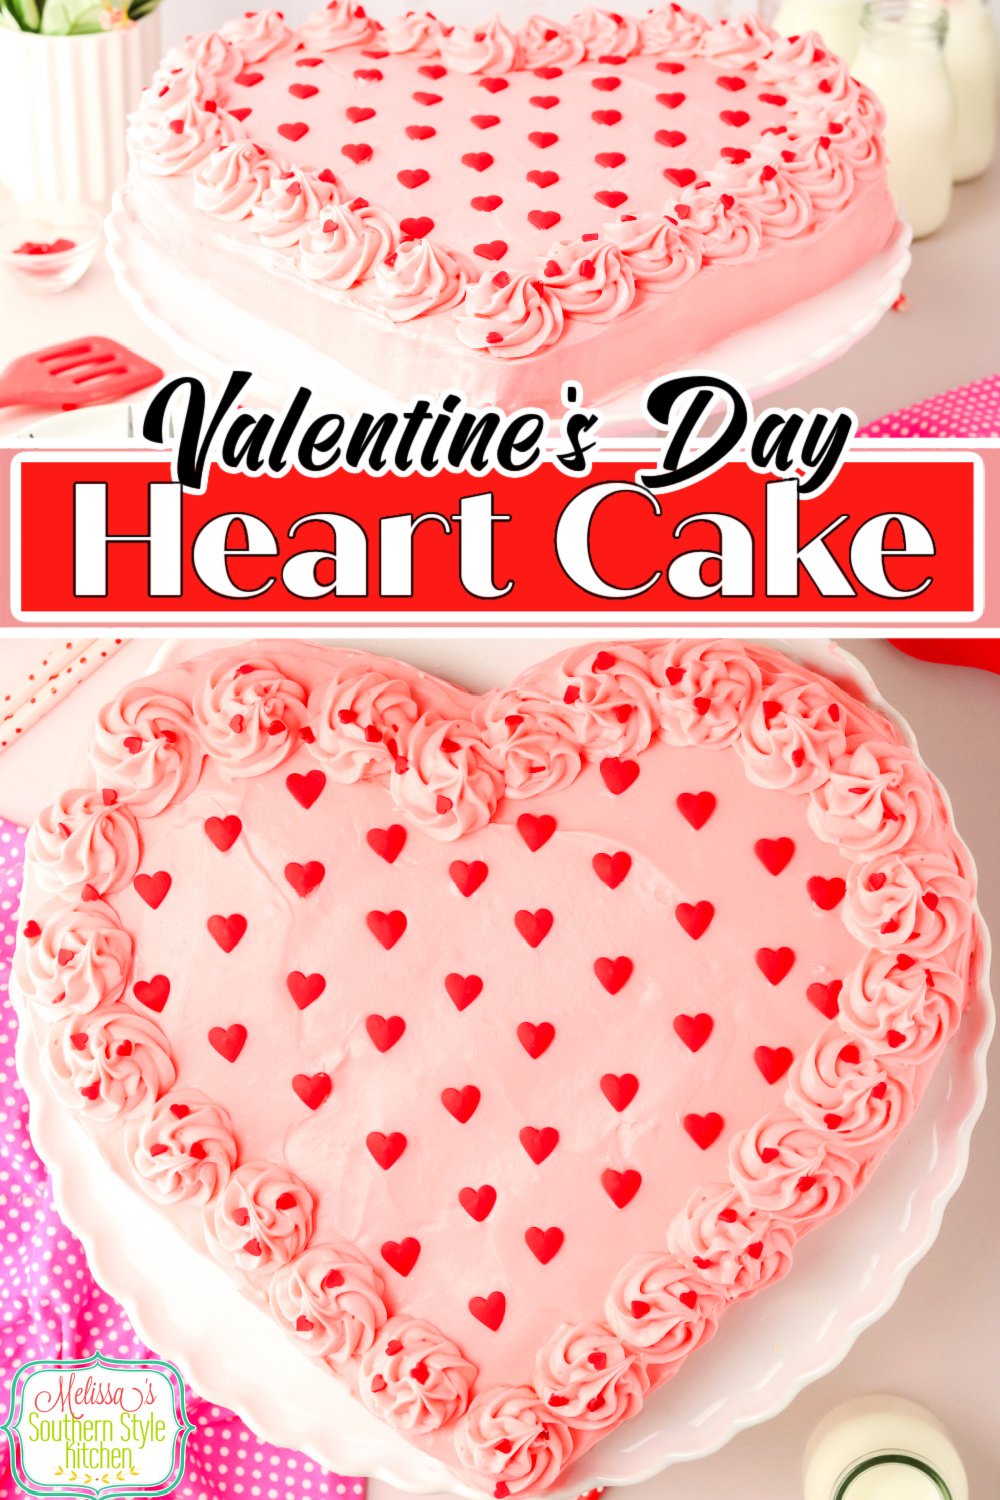 This pretty Heart Shaped Cake is a delicious way to show your loved ones how much you care. No special pan needed! #valentine'sday #heartshapedcakerecipe #redvelvetcake #holidaydesserts #chocolatecake #heartcakerecipe via @melissasssk